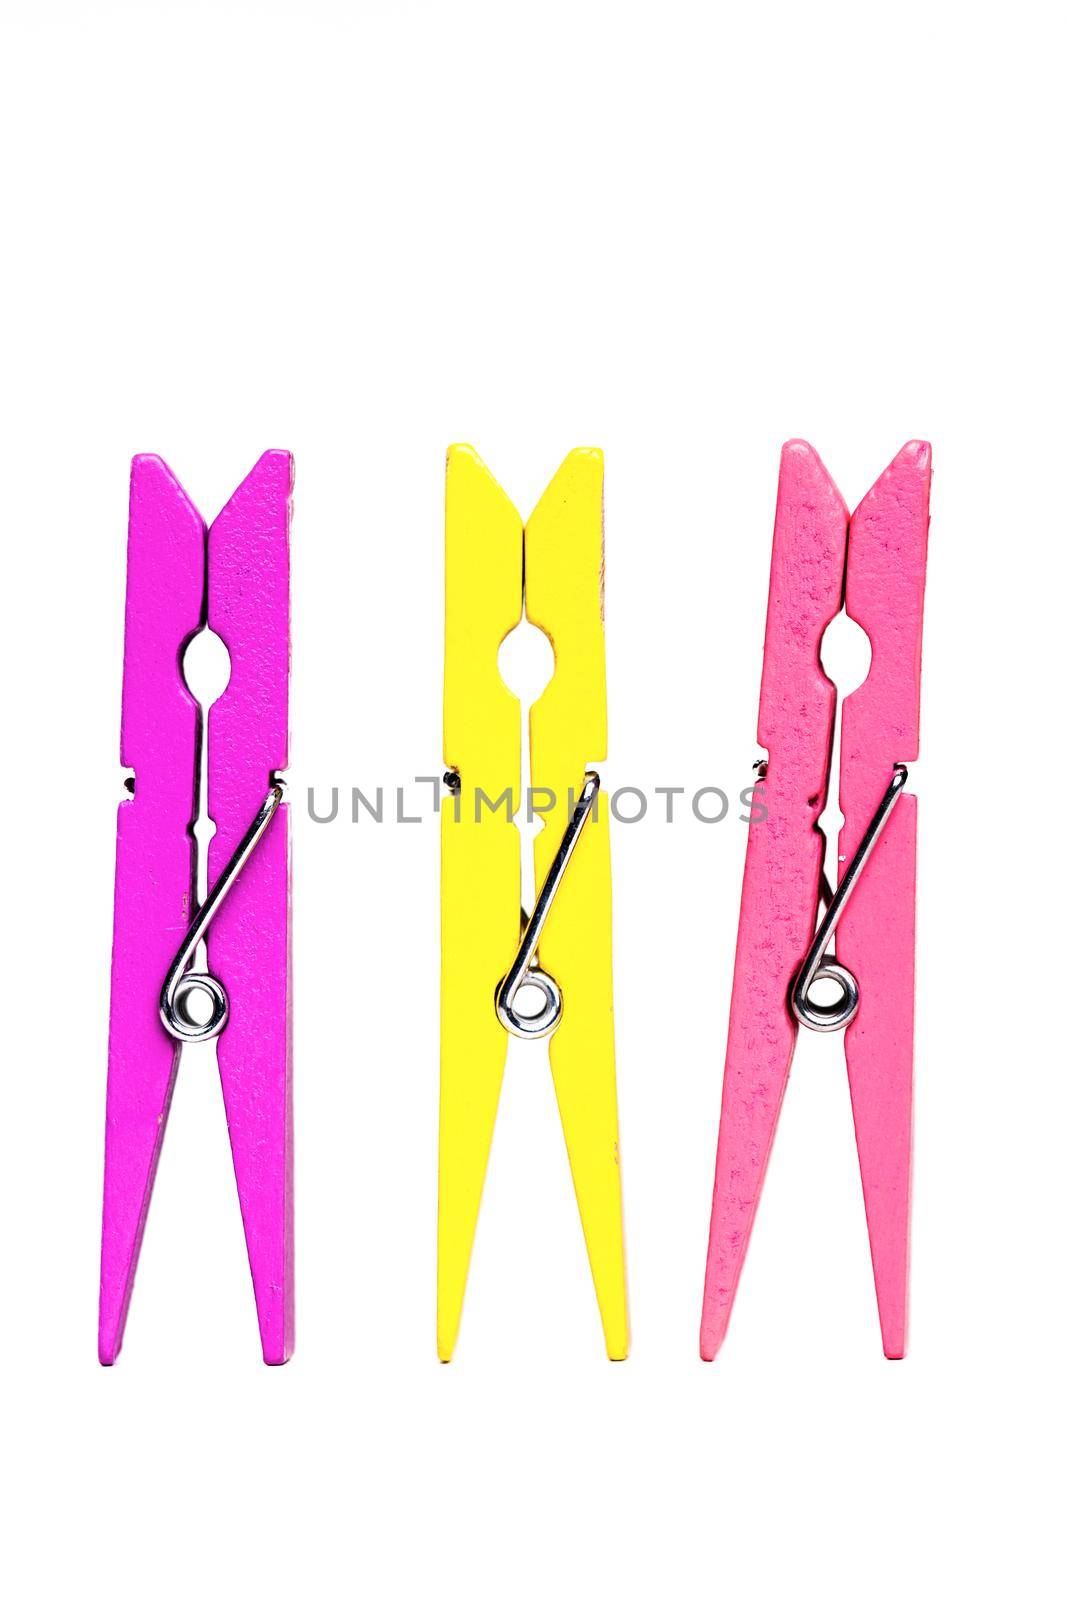 purple, yellow and pink clothes pegs by kokimk